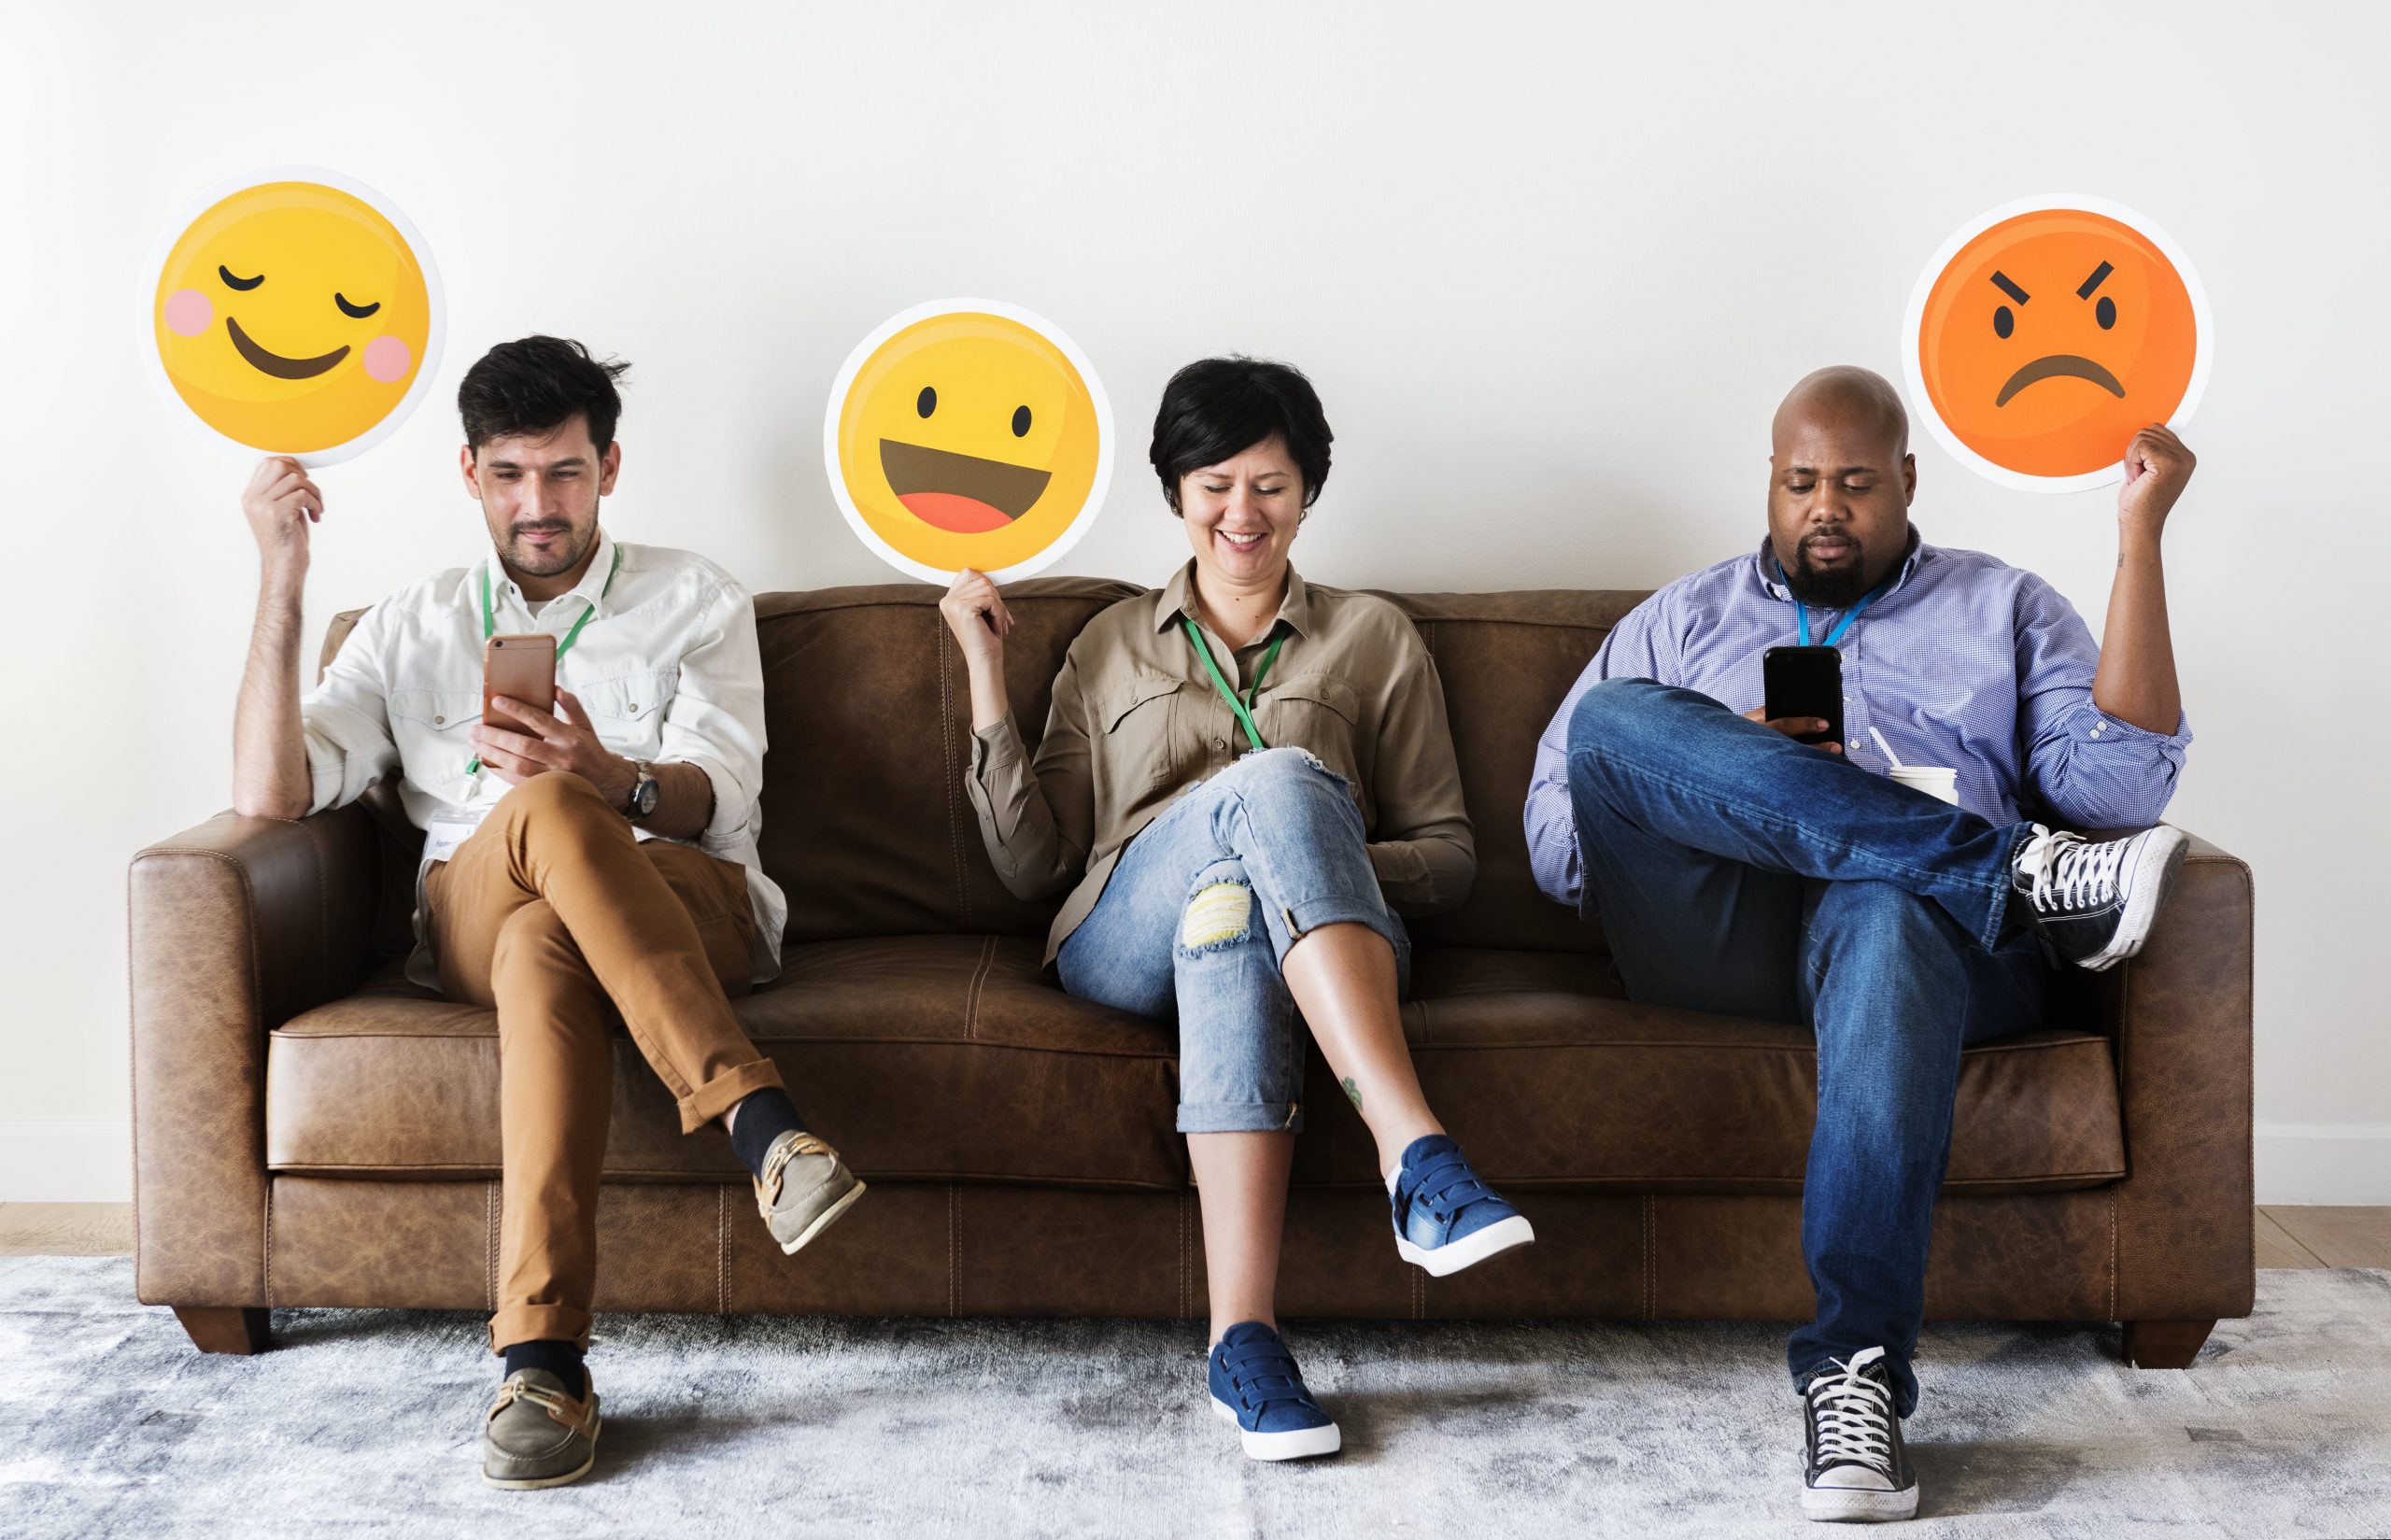 Emojis are the perfect tool to collect customer feedback